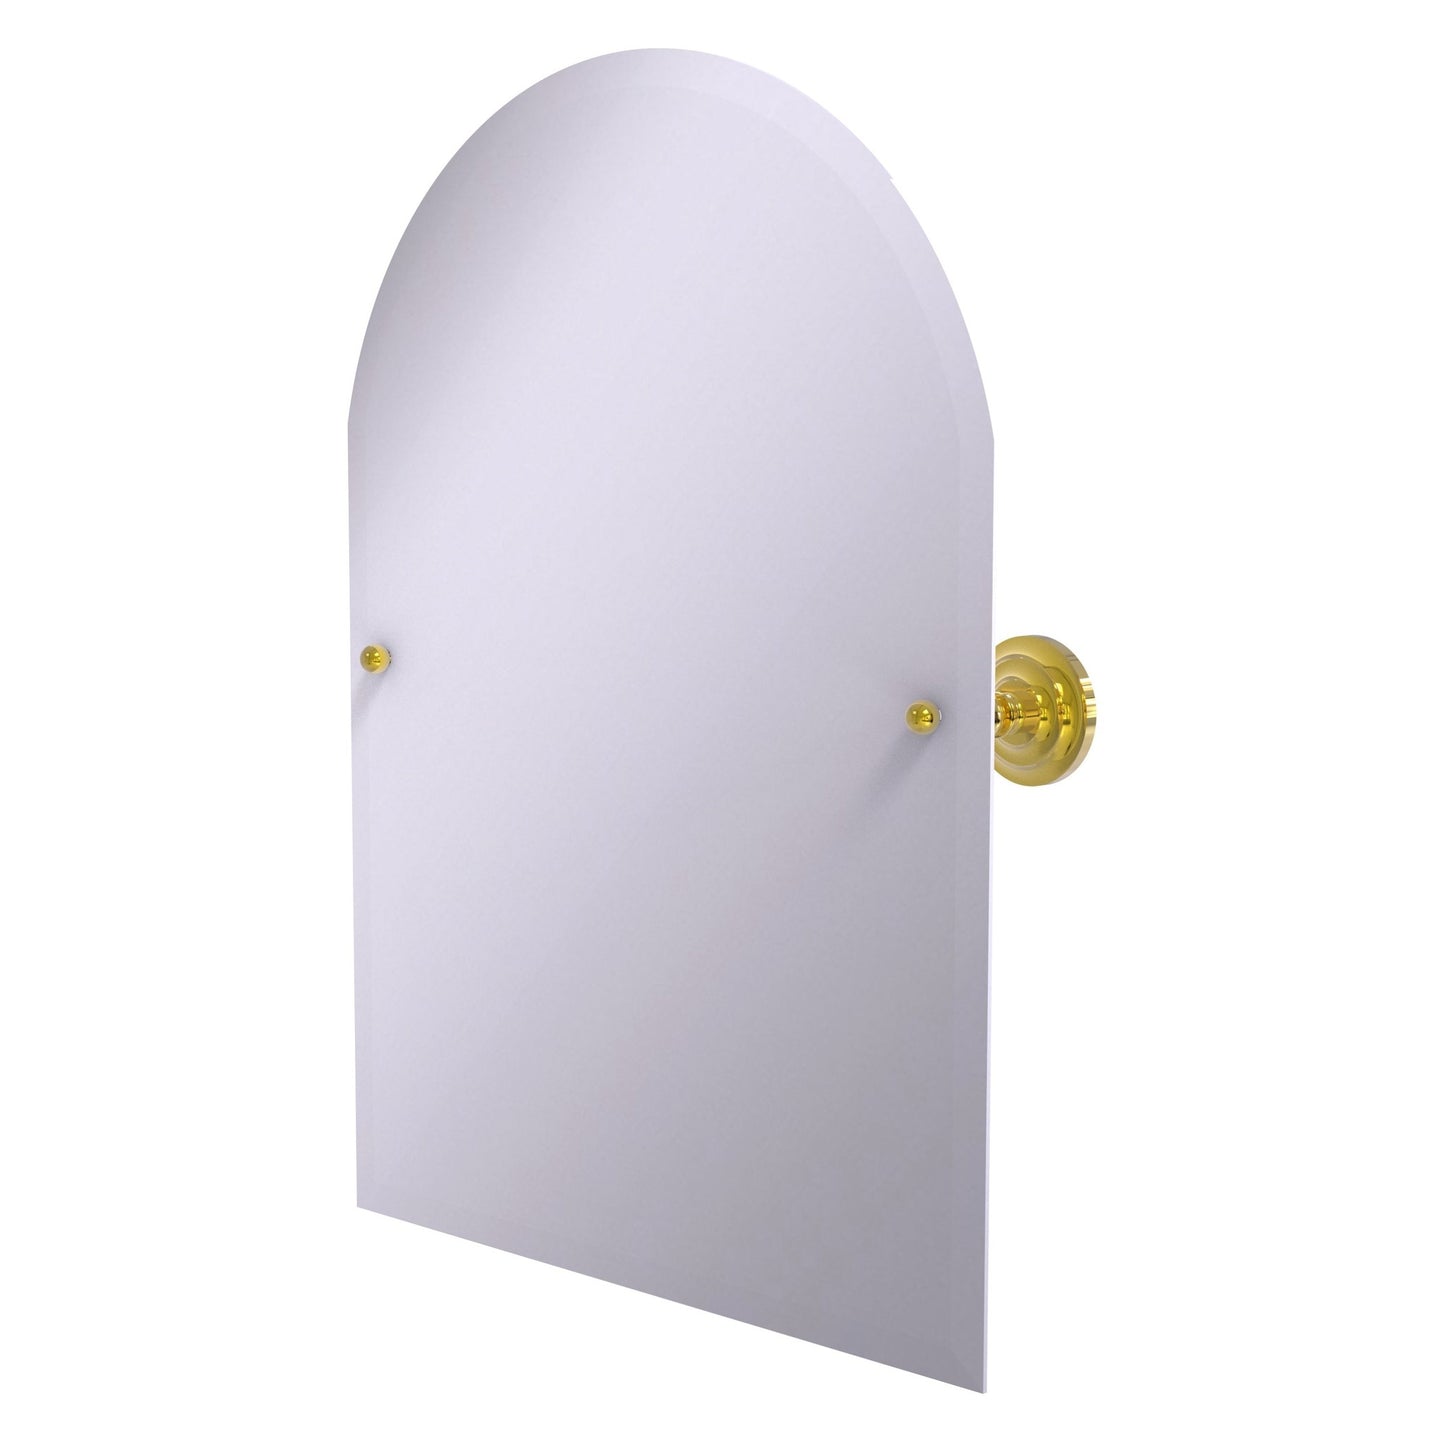 Allied Brass Prestige Que New 21" x 26" Polished Brass Solid Brass Frameless Arched Top Tilt Mirror With Beveled Edge